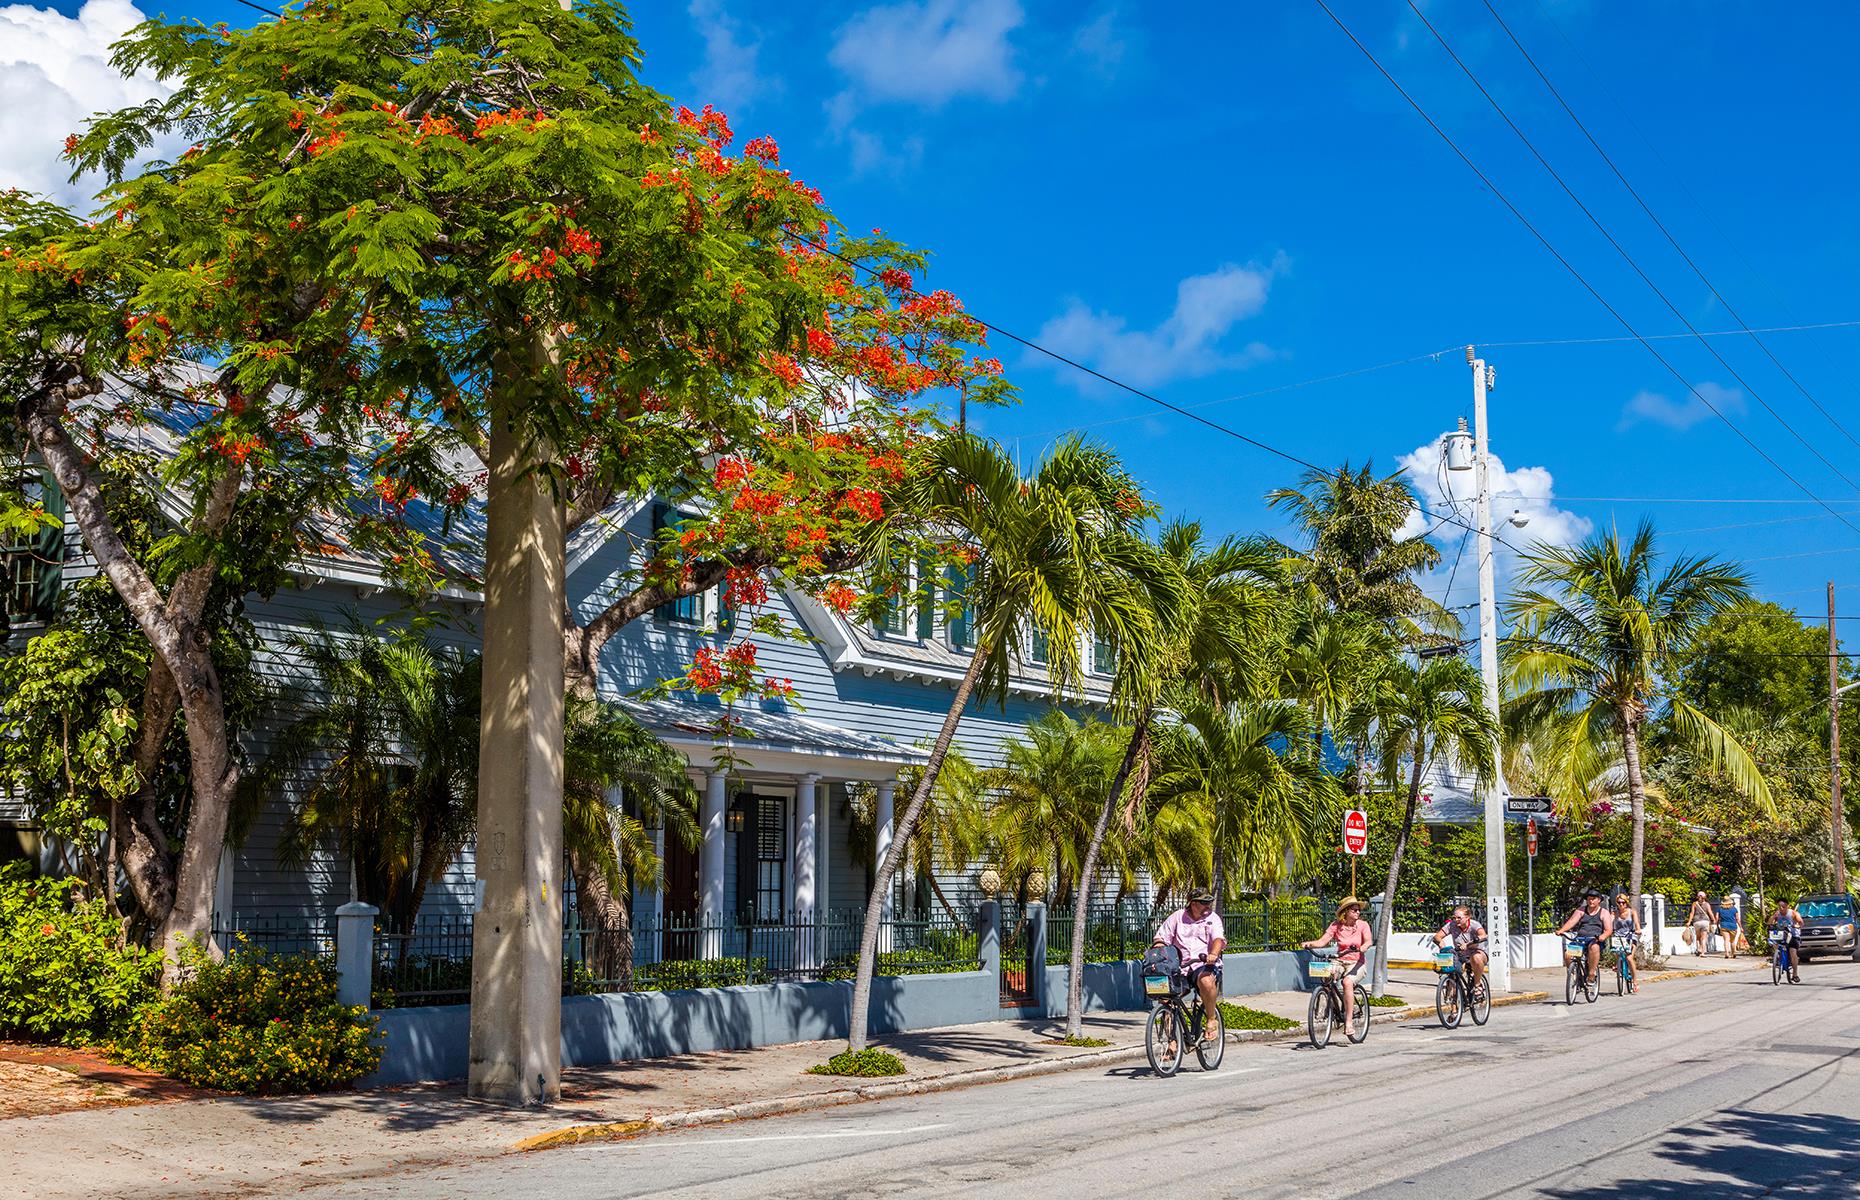 <p>Granted, to get to <a href="http://www.loveexploring.com/guides/73827/explore-the-florida-keys-where-to-stay-what-to-eat-the-top-things-to-do">Key West</a> you'll probably need a car (although there are Greyhound services from Miami and Orlando), but once there you won't need to worry about having a set of wheels. Duval Street, the heart of Key West, is extremely walkable and the city itself, located on an island, measures around two by four miles (3.2km by 6.4km). If you don't fancy walking everywhere, there's a free Duval Loop bus service that operates along all the key stops, but you probably won't want to be on land anyway. Key West is renowned for excellent snorkeling and scuba diving, as well as kayaking and sunset cruises.</p>